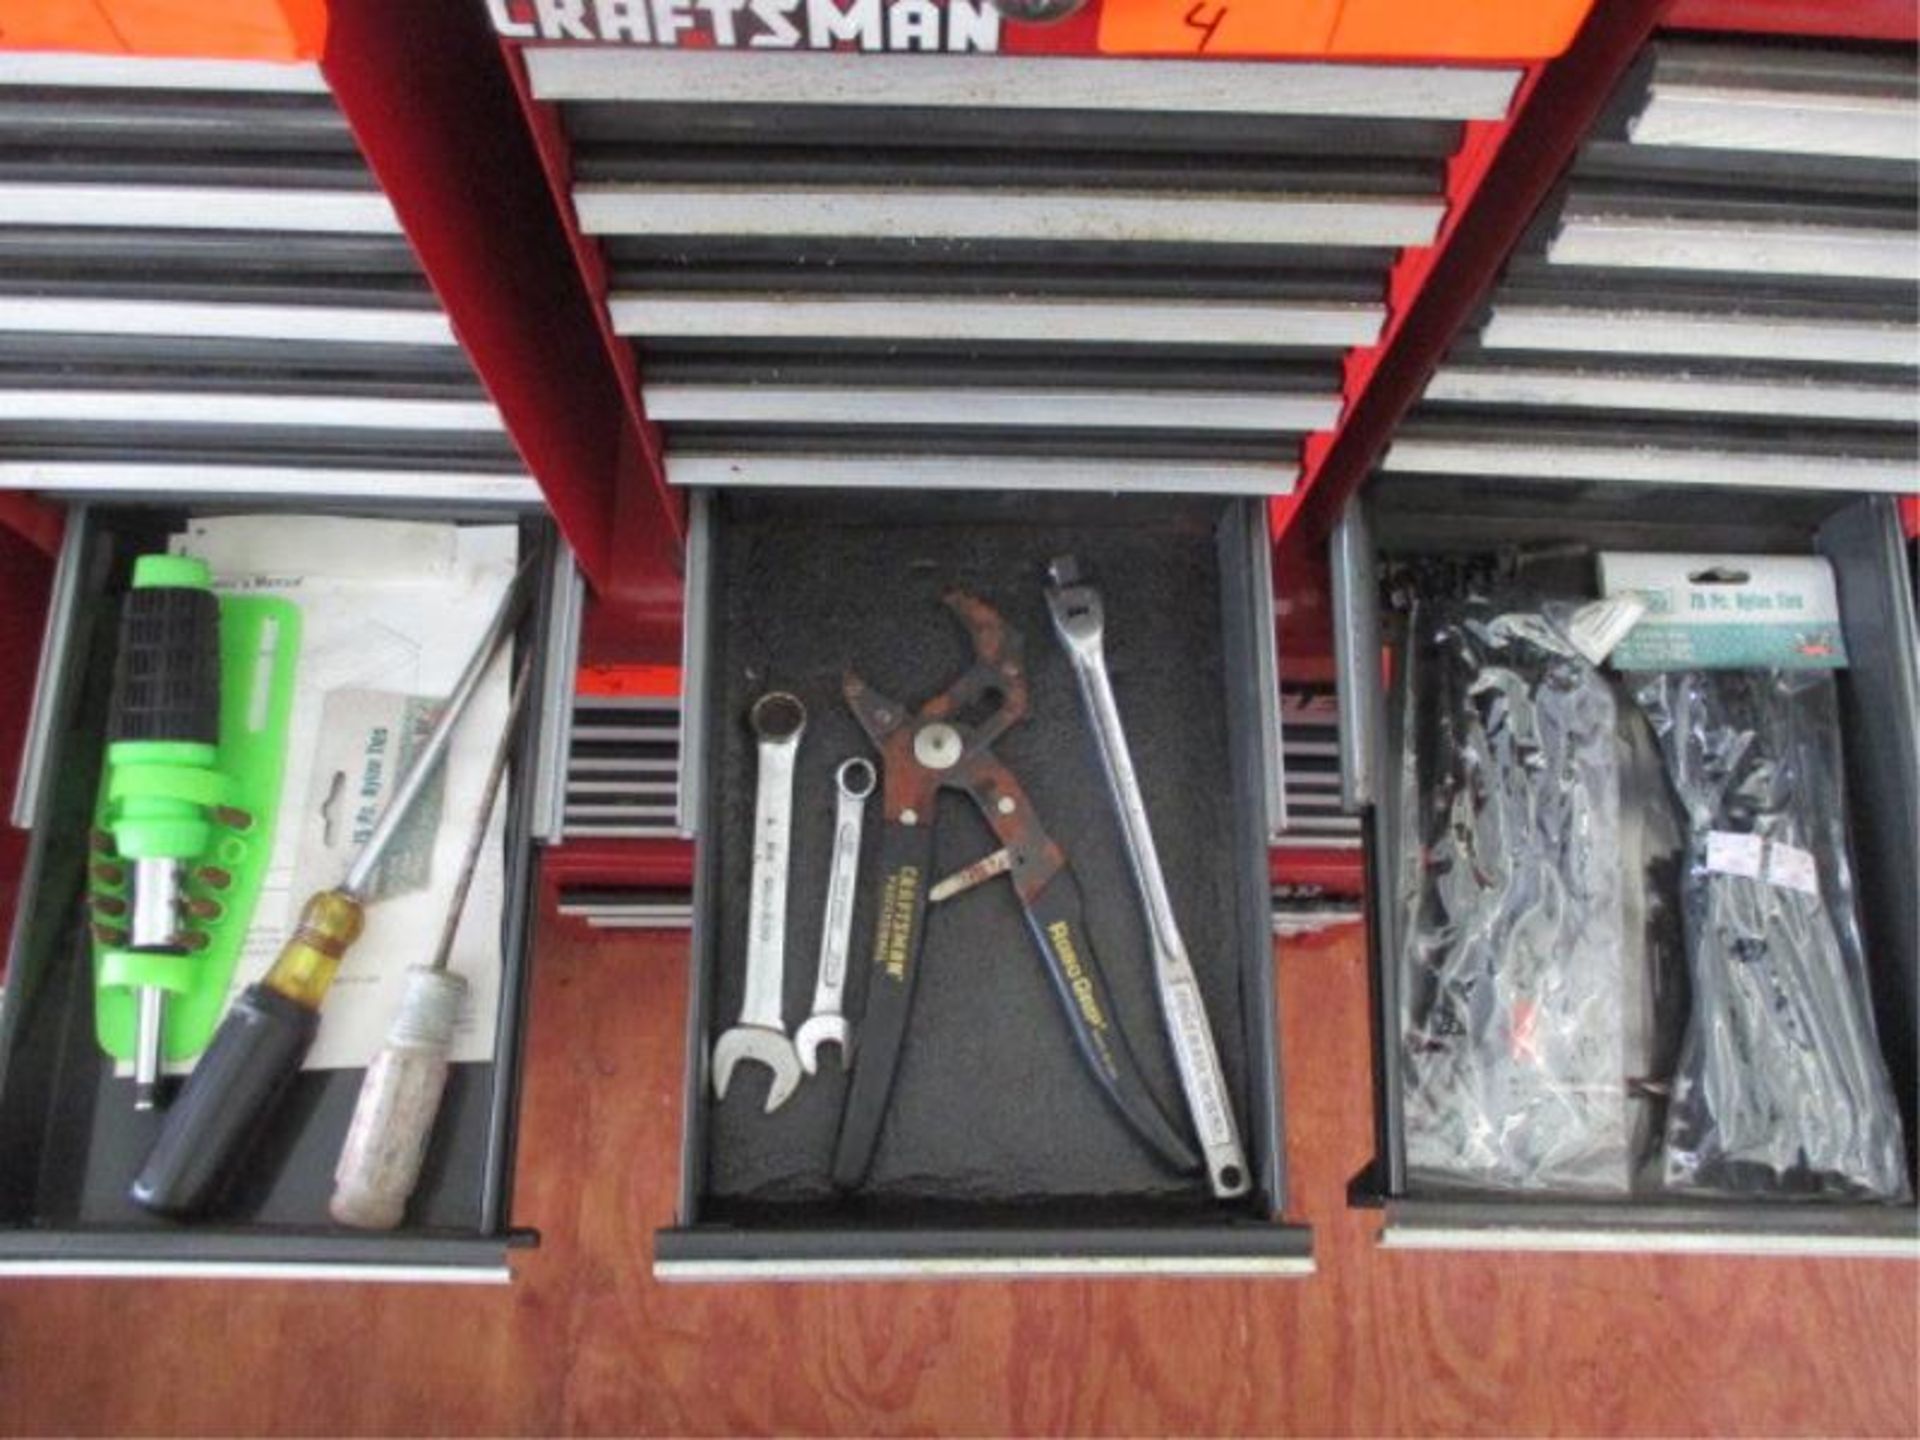 (3) Craftsman Small Tool Boxres, Red, 6 Drawers w/ Assorted Tools Including: Pliers, Screwdrivers, - Image 11 of 11